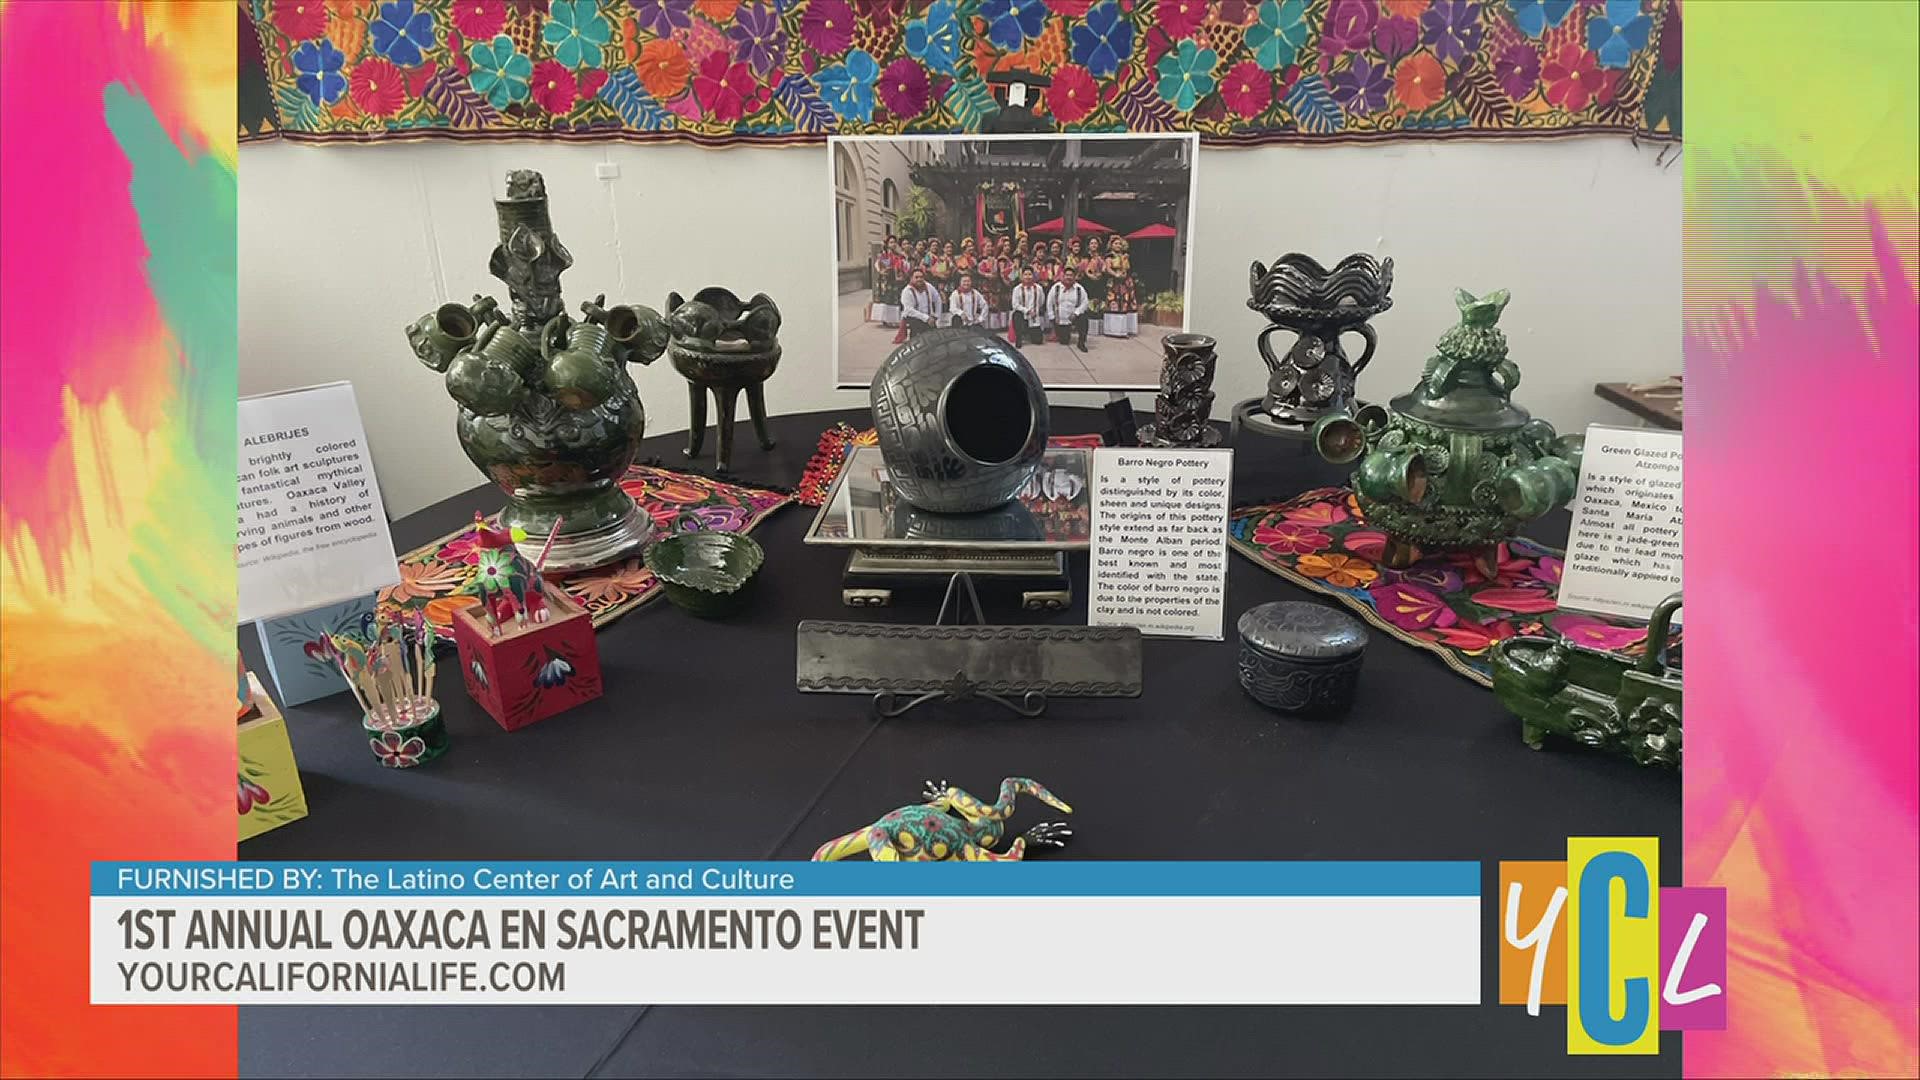 Enjoy a new cultural experience that brings something new to Sac in an effort to show children and families the cultural importance of The Guelaguetza celebration.